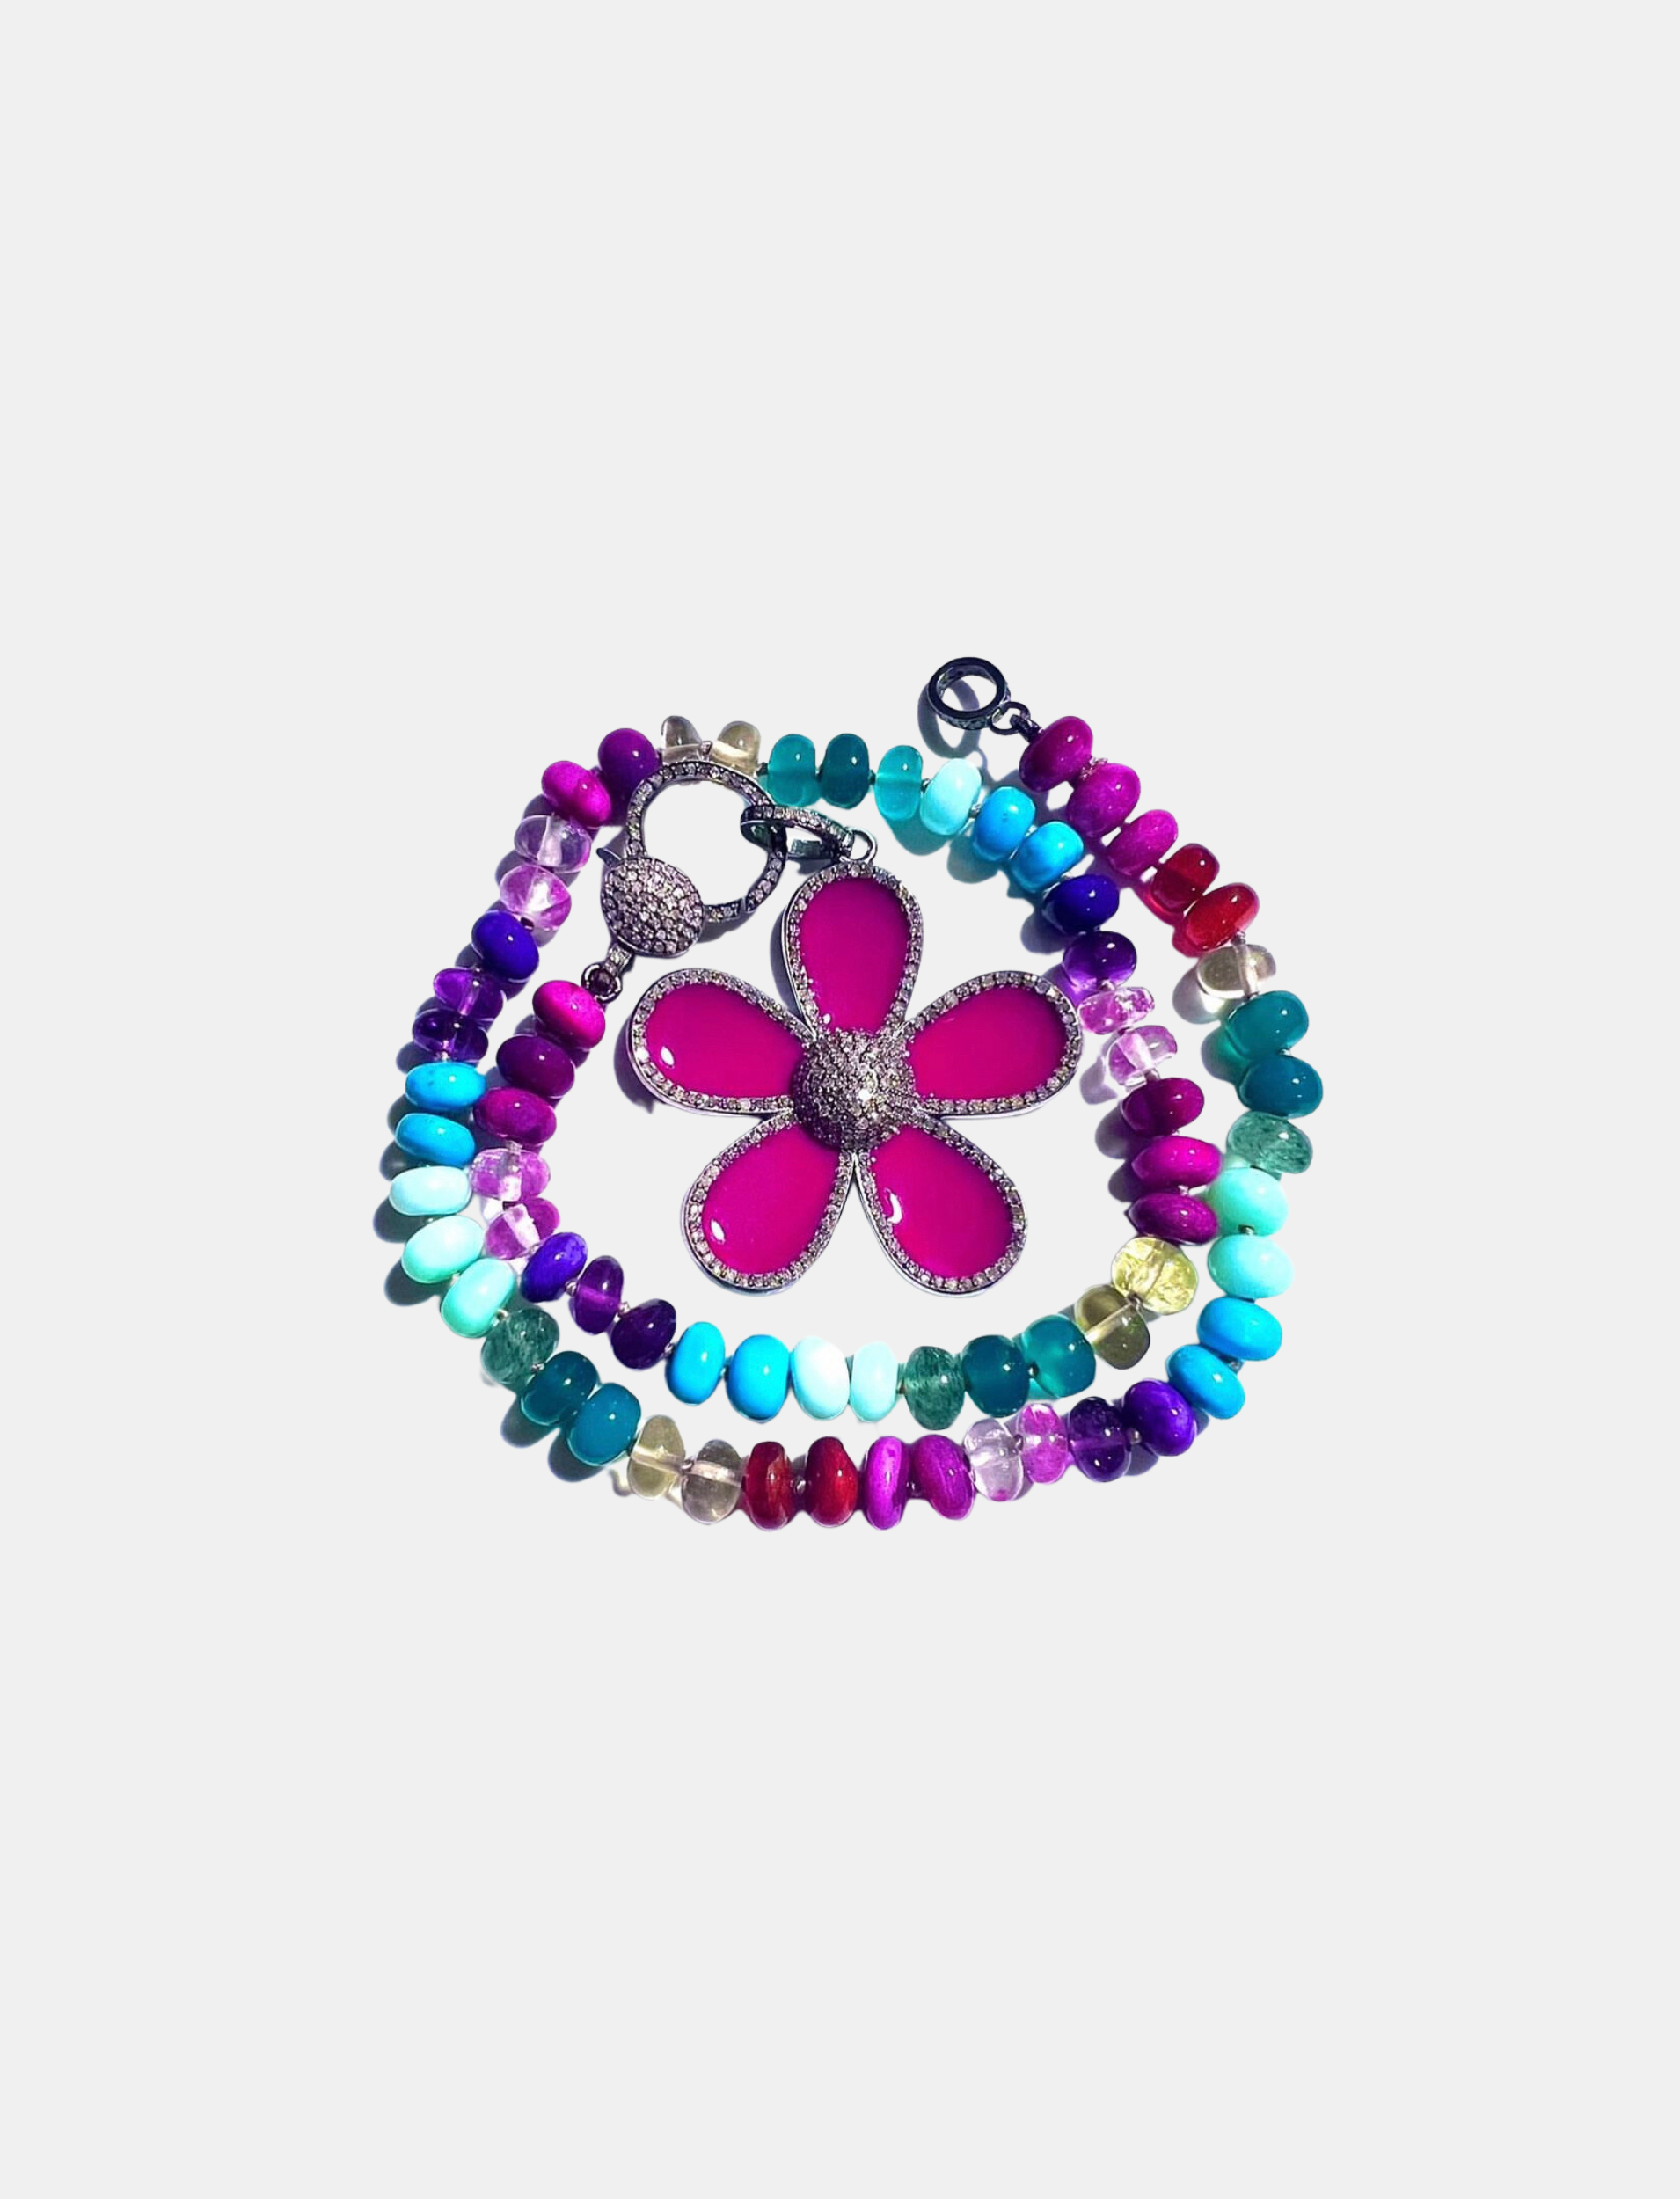 Mixed Gem Knotted Necklace, Large Pave Diamond Clasp, Large Pave Diamond Fuchsia Flower